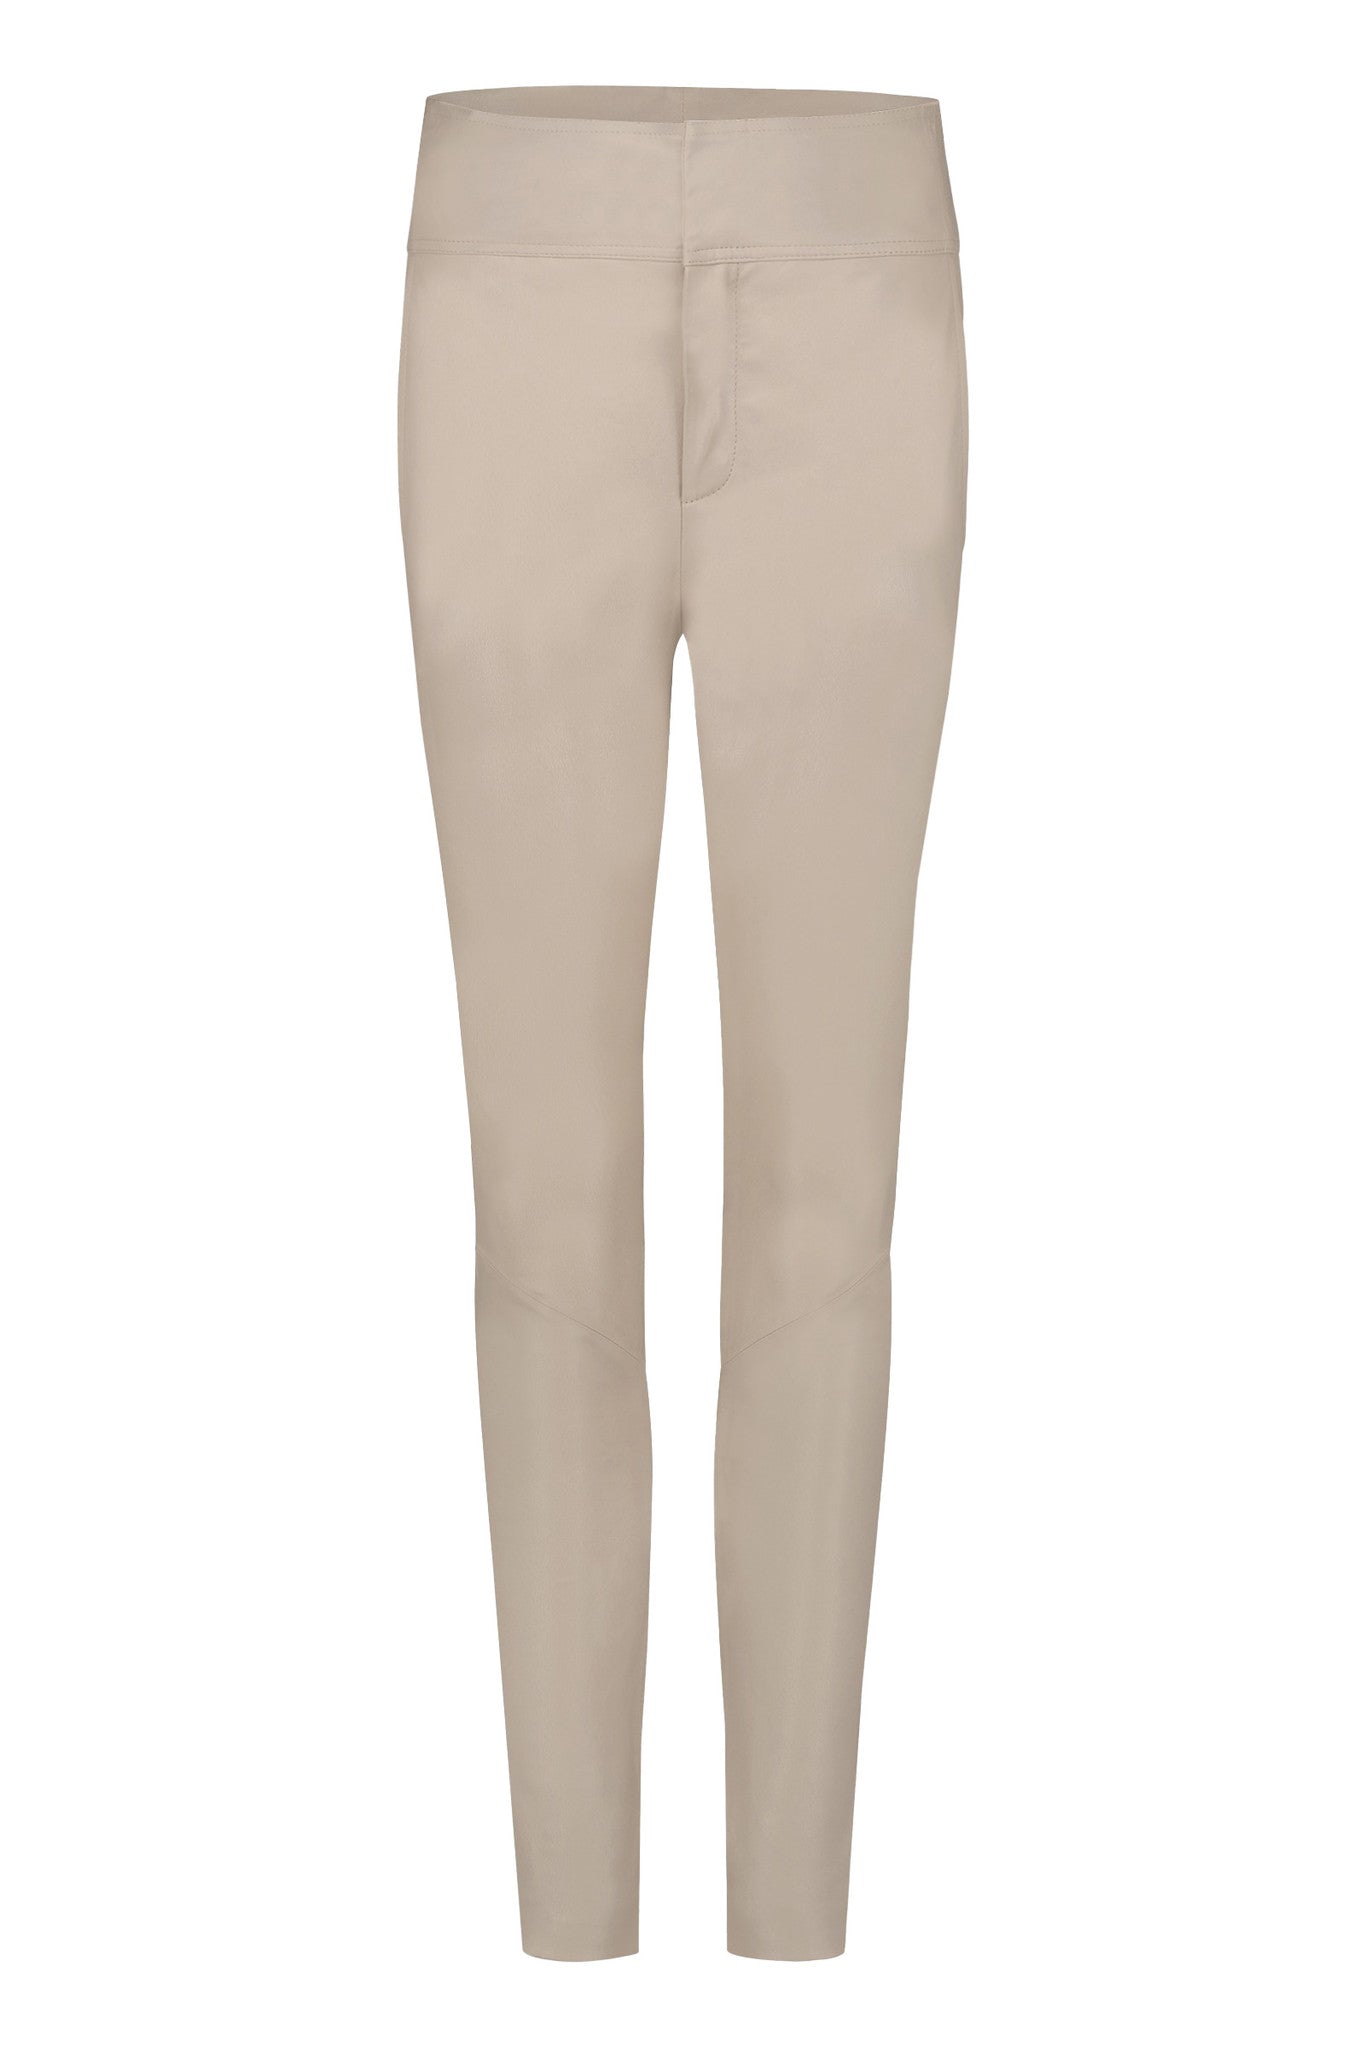 DNA Amsterdam Pananty Leather Pant - Feather White - RUM Amsterdam